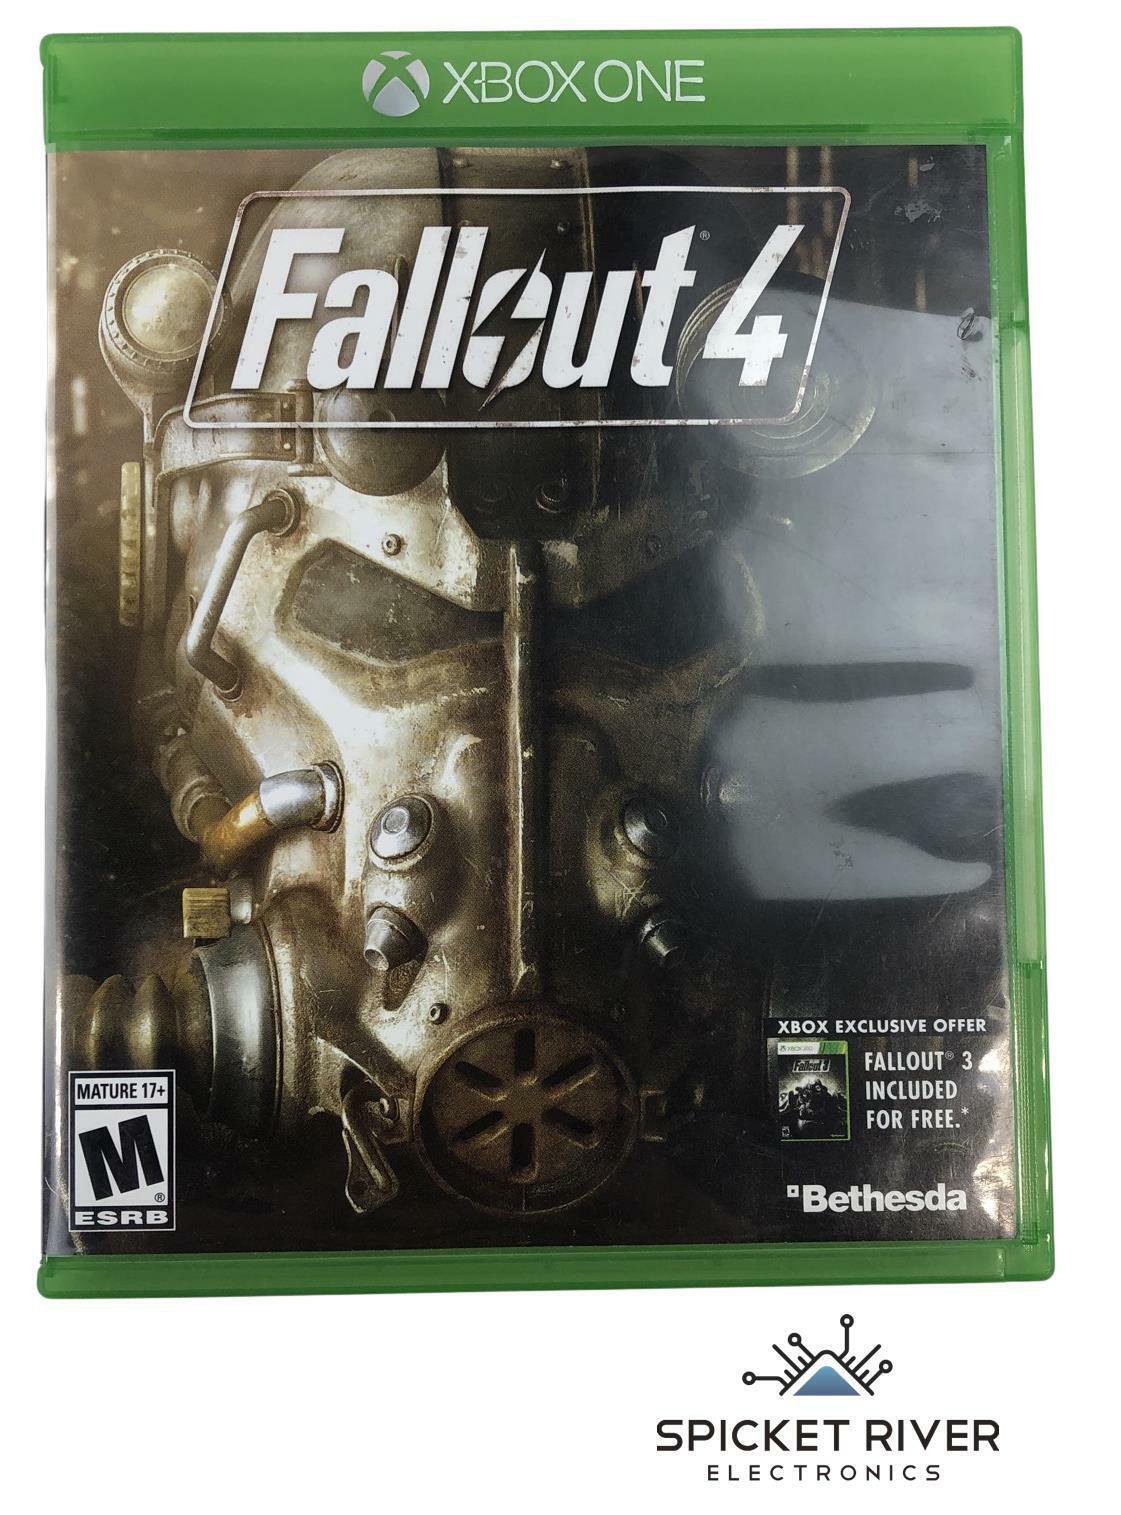 Microsoft XBox One - Fallout 4 - 2015 - Action / Adventure Video Game